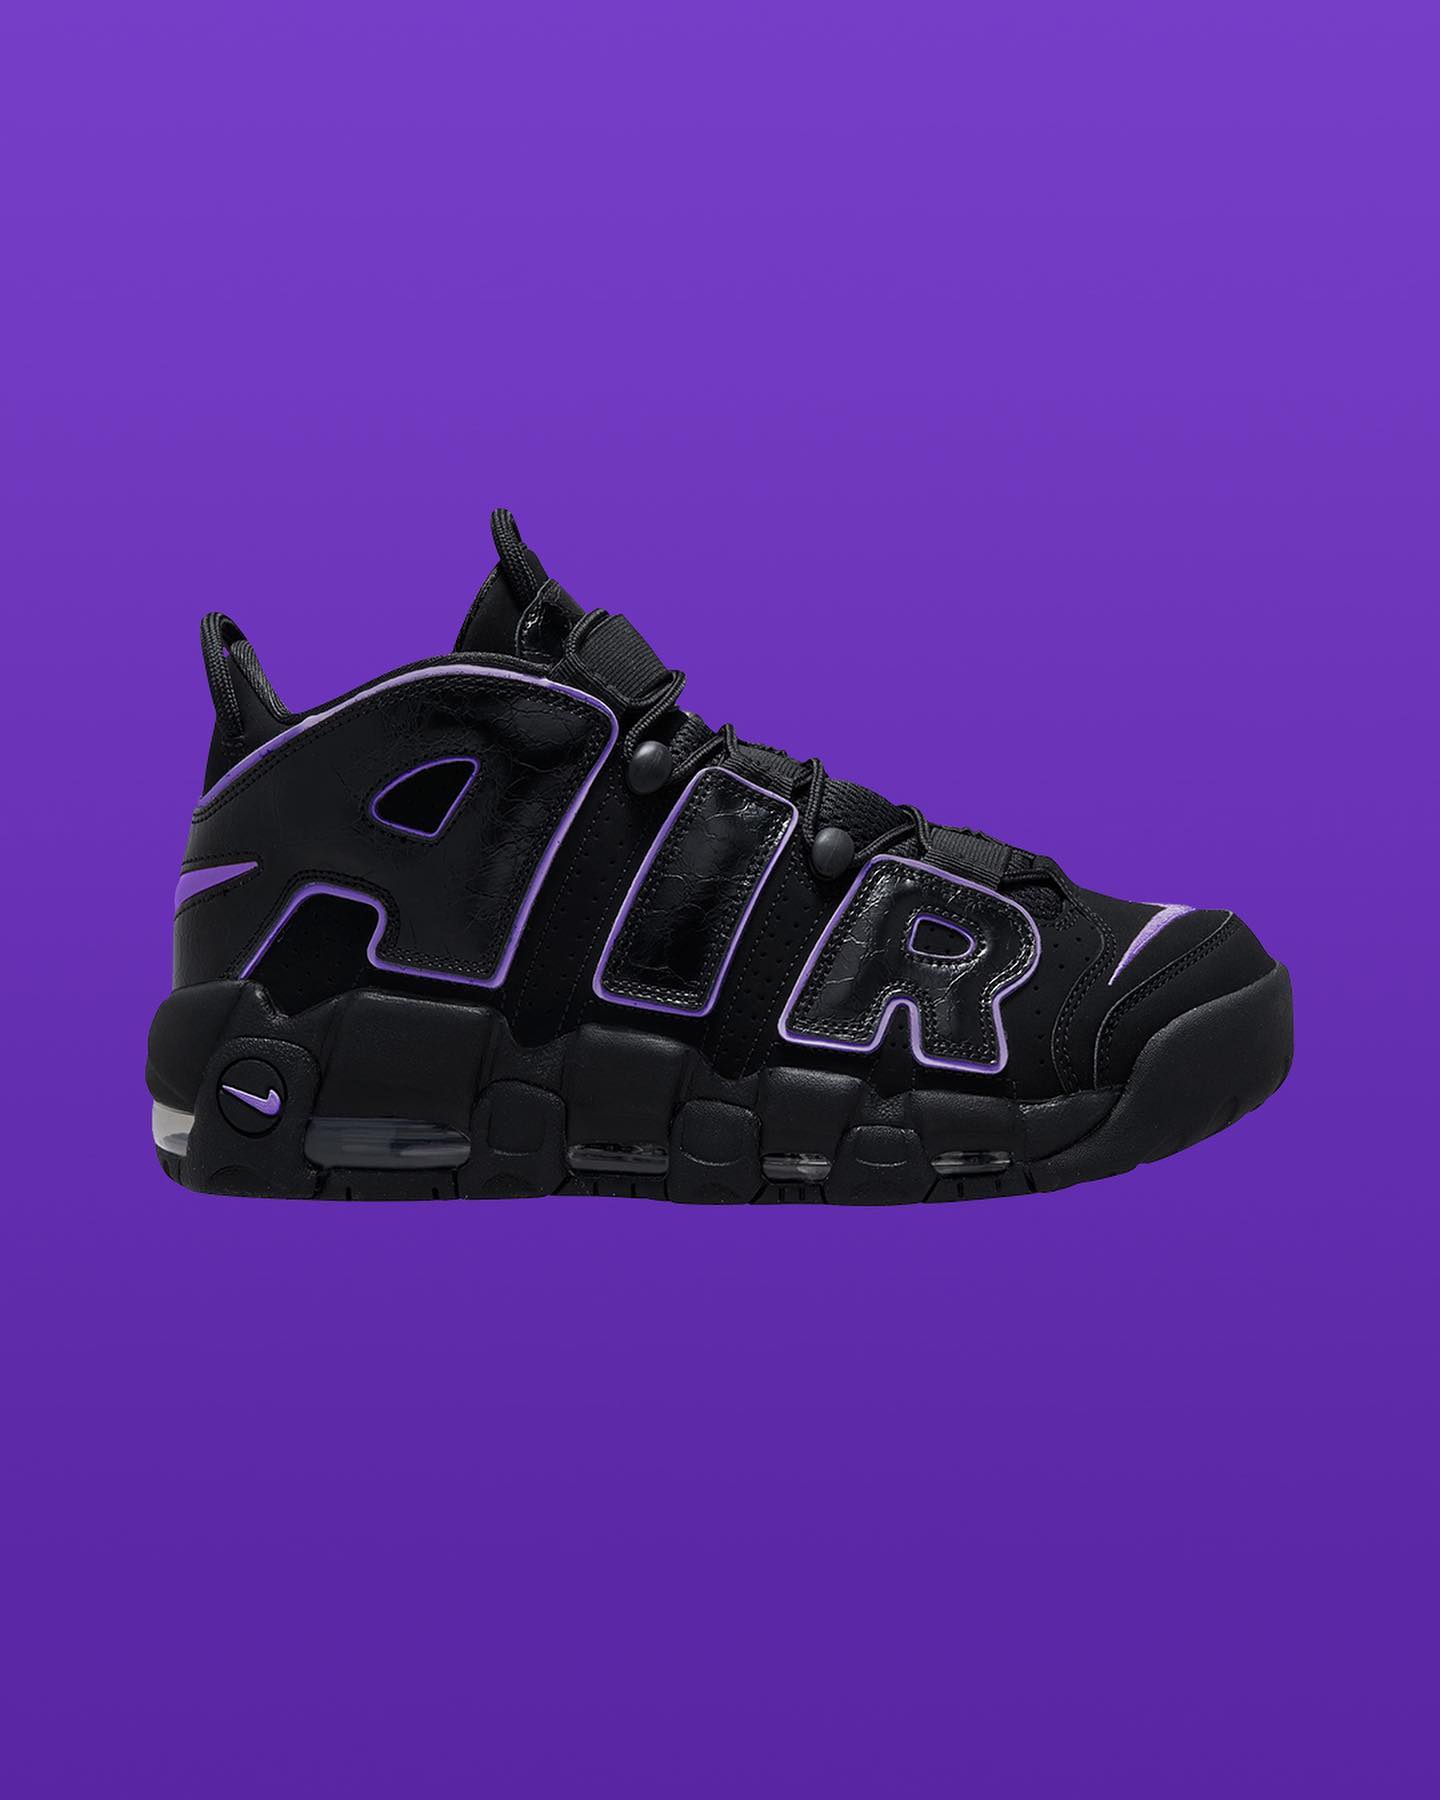 Nike,Air More Uptempo,Lakers  湖人「大 AIR」来了！全新配色 Uptempo 实物首次曝光！